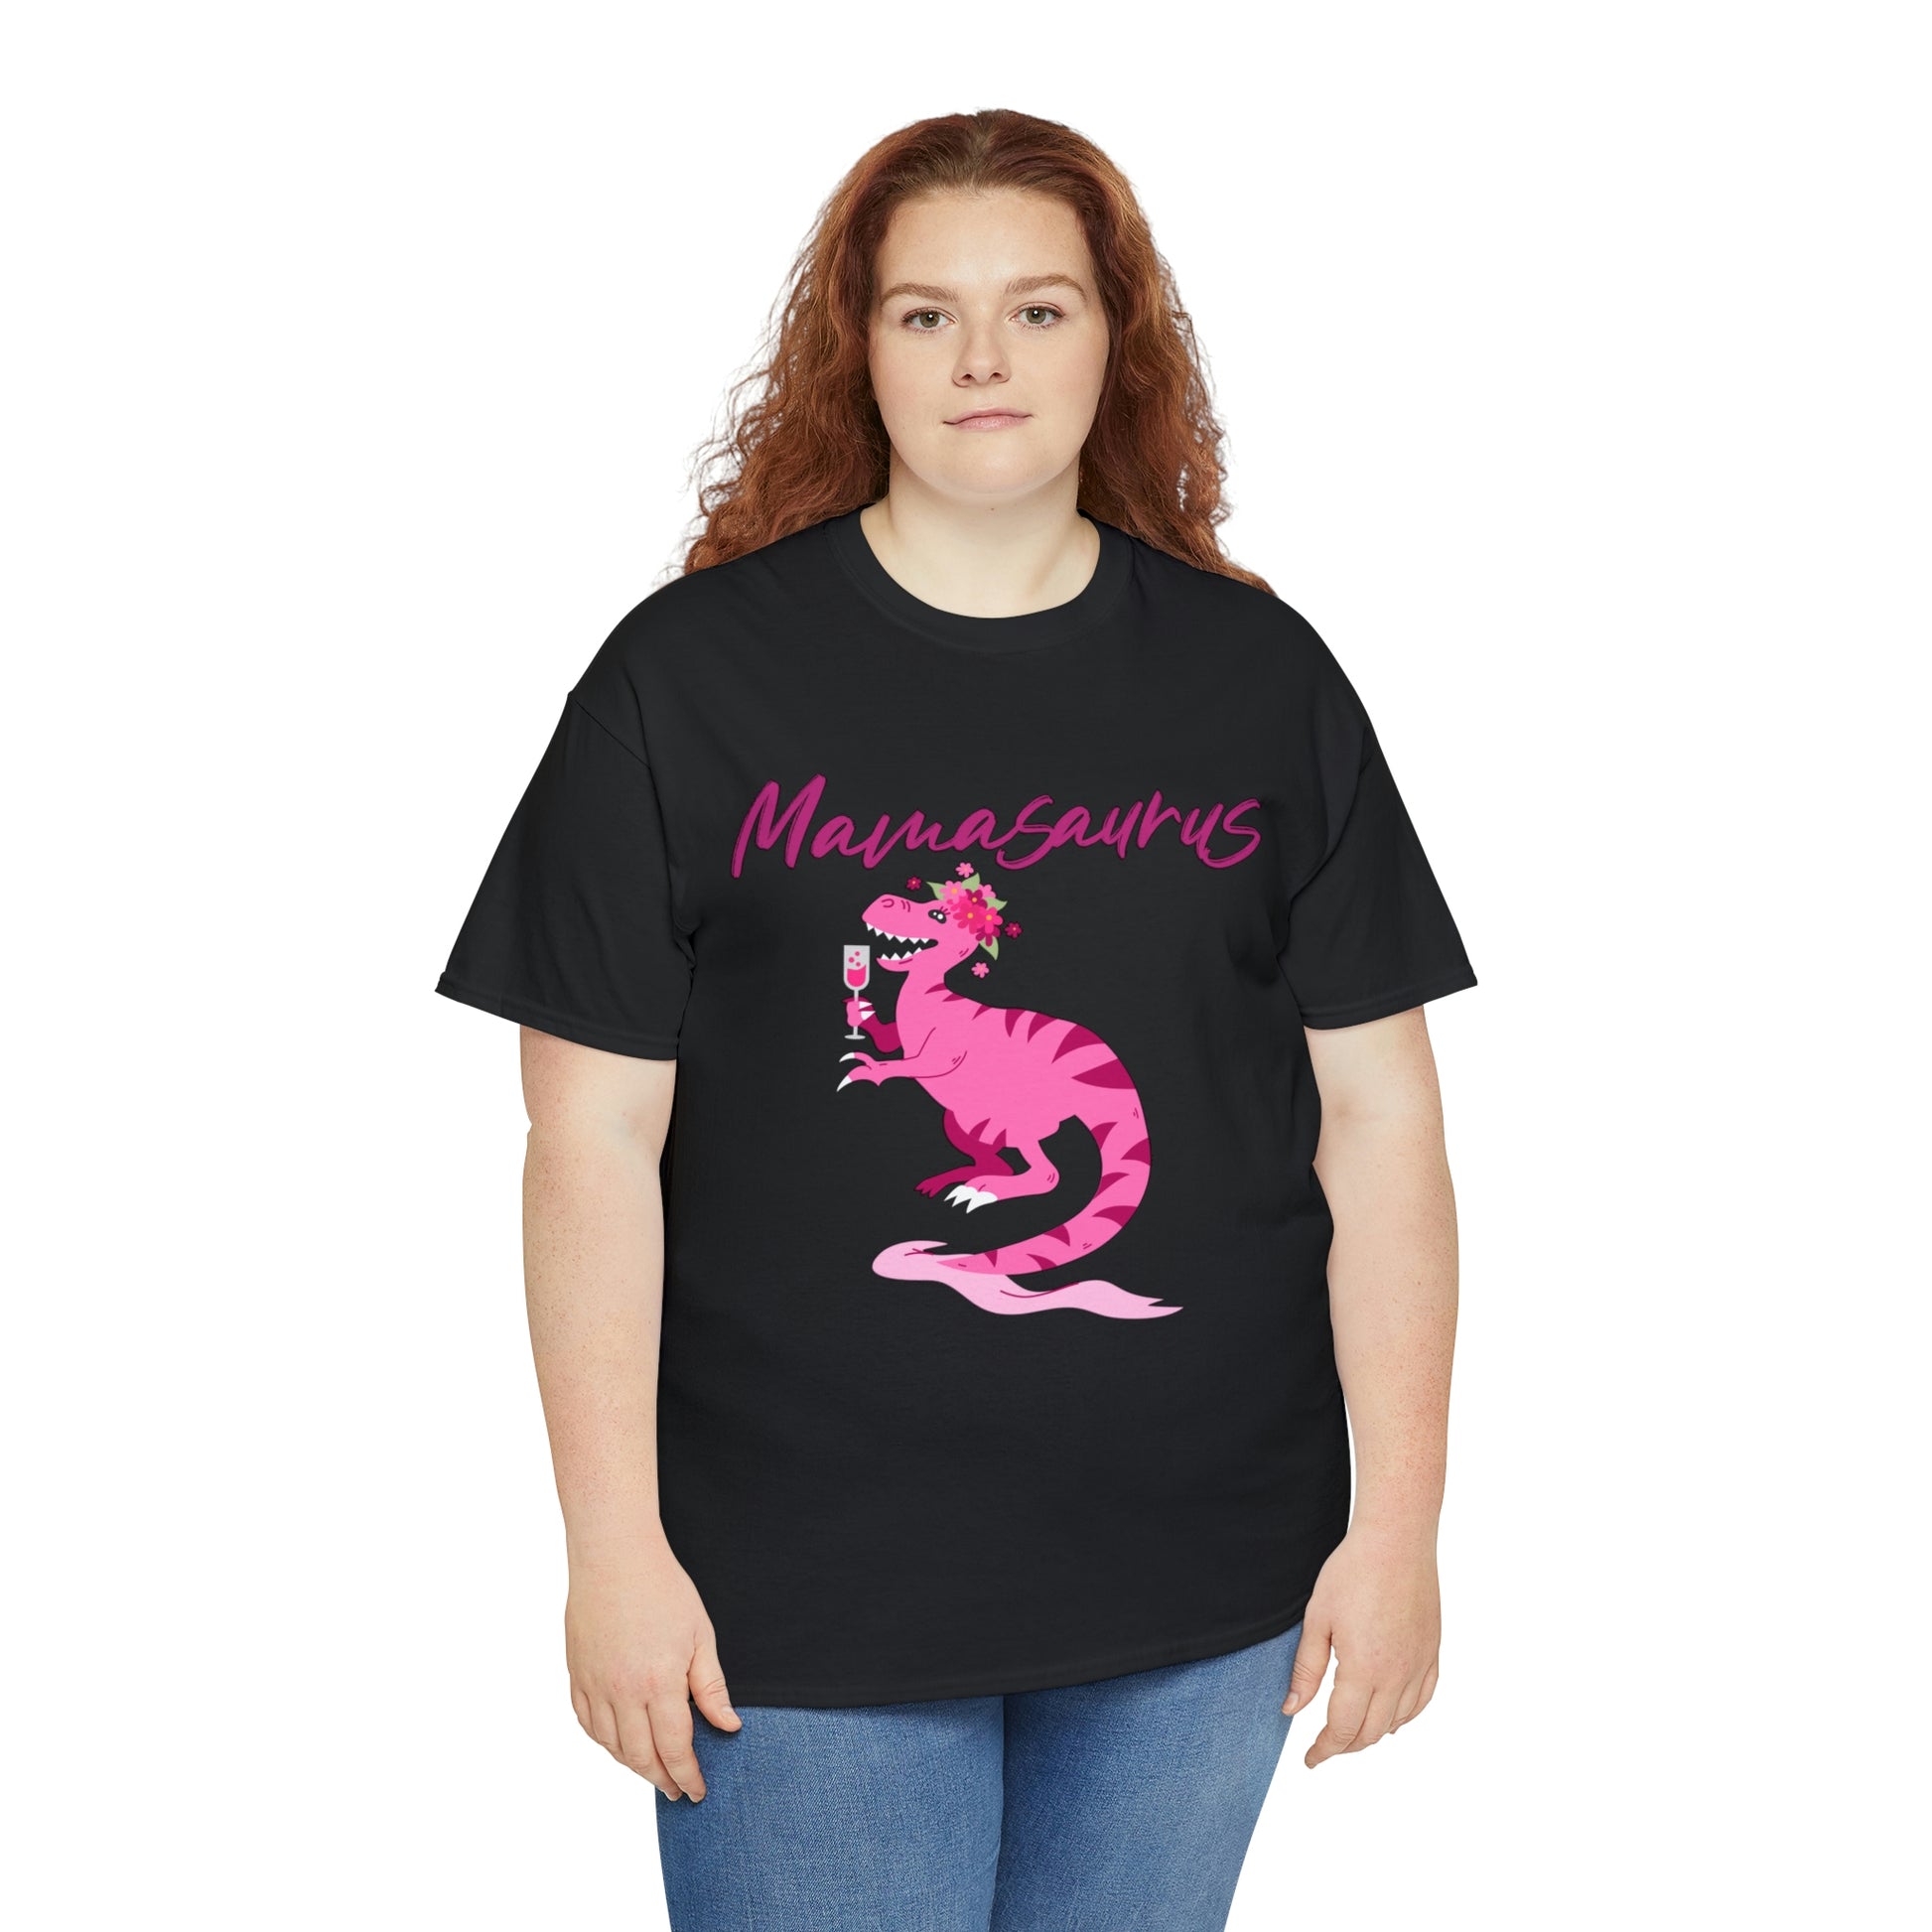 Mock up of a plus-size woman wearing the Black t-shirt